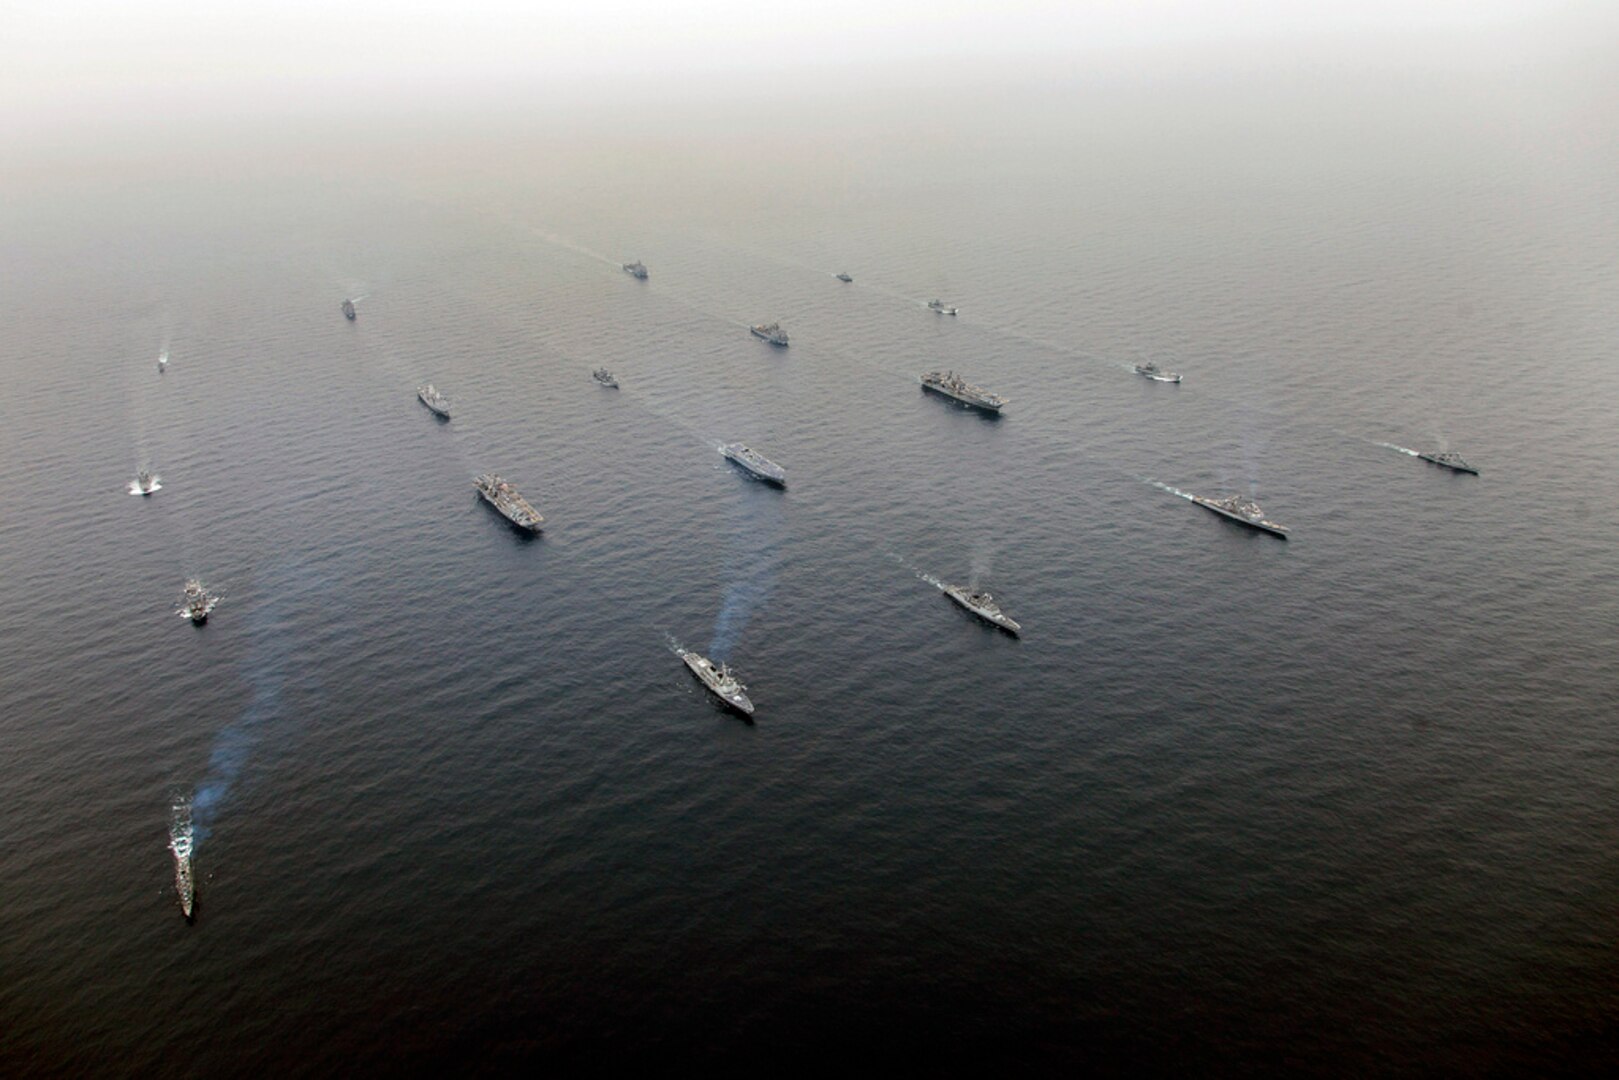 PACIFIC OCEAN (March 8, 206) - Ships of the Bonhomme Richard Expeditionary Strike Group and Boxer Amphibious Ready Group, along with Republic of Korea Flotilla 5, transit in formation to kick off exercise Ssang Yong 2016, the largest combined amphibious exercise of its kind to date, designed to strengthen interoperability and working relationships across a wide range of military operations from disaster relief to complex expeditionary operations. 